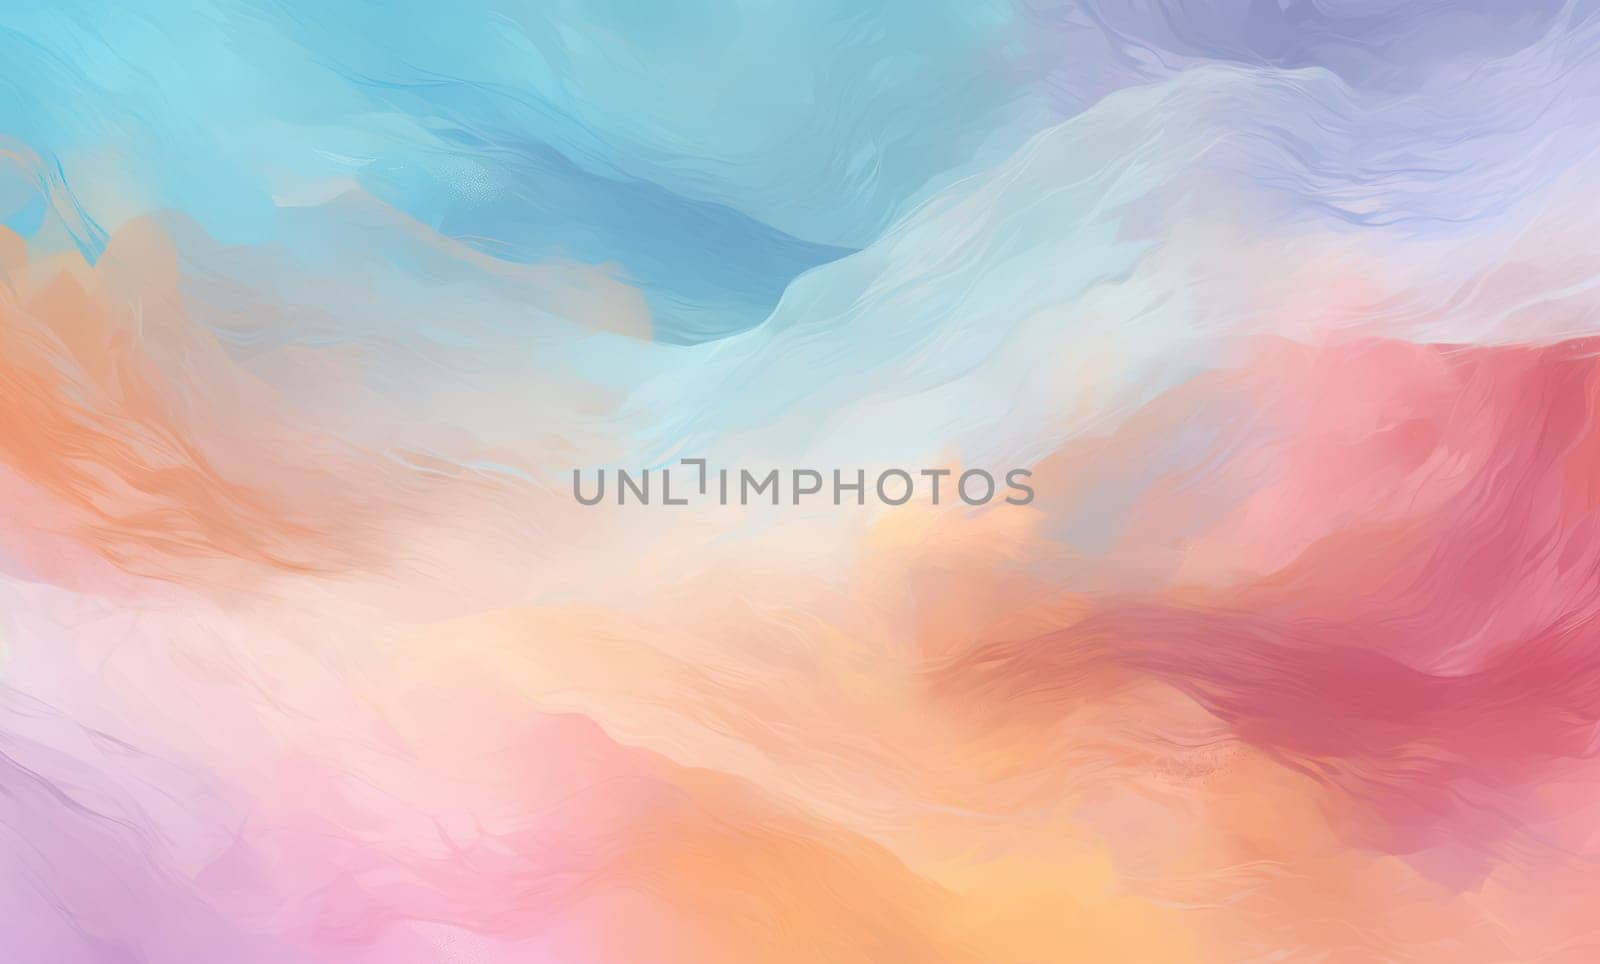 Abstract Watercolor Splash: Vibrant Pastel Fantasy on Blue Grunge Paper by Vichizh